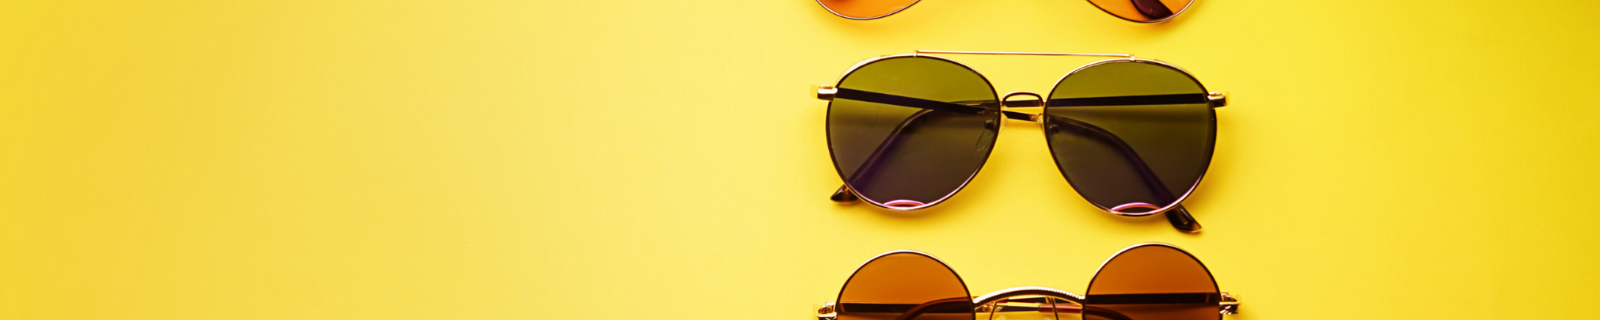 Thee pairs of sunglasses led flat on a yellow background